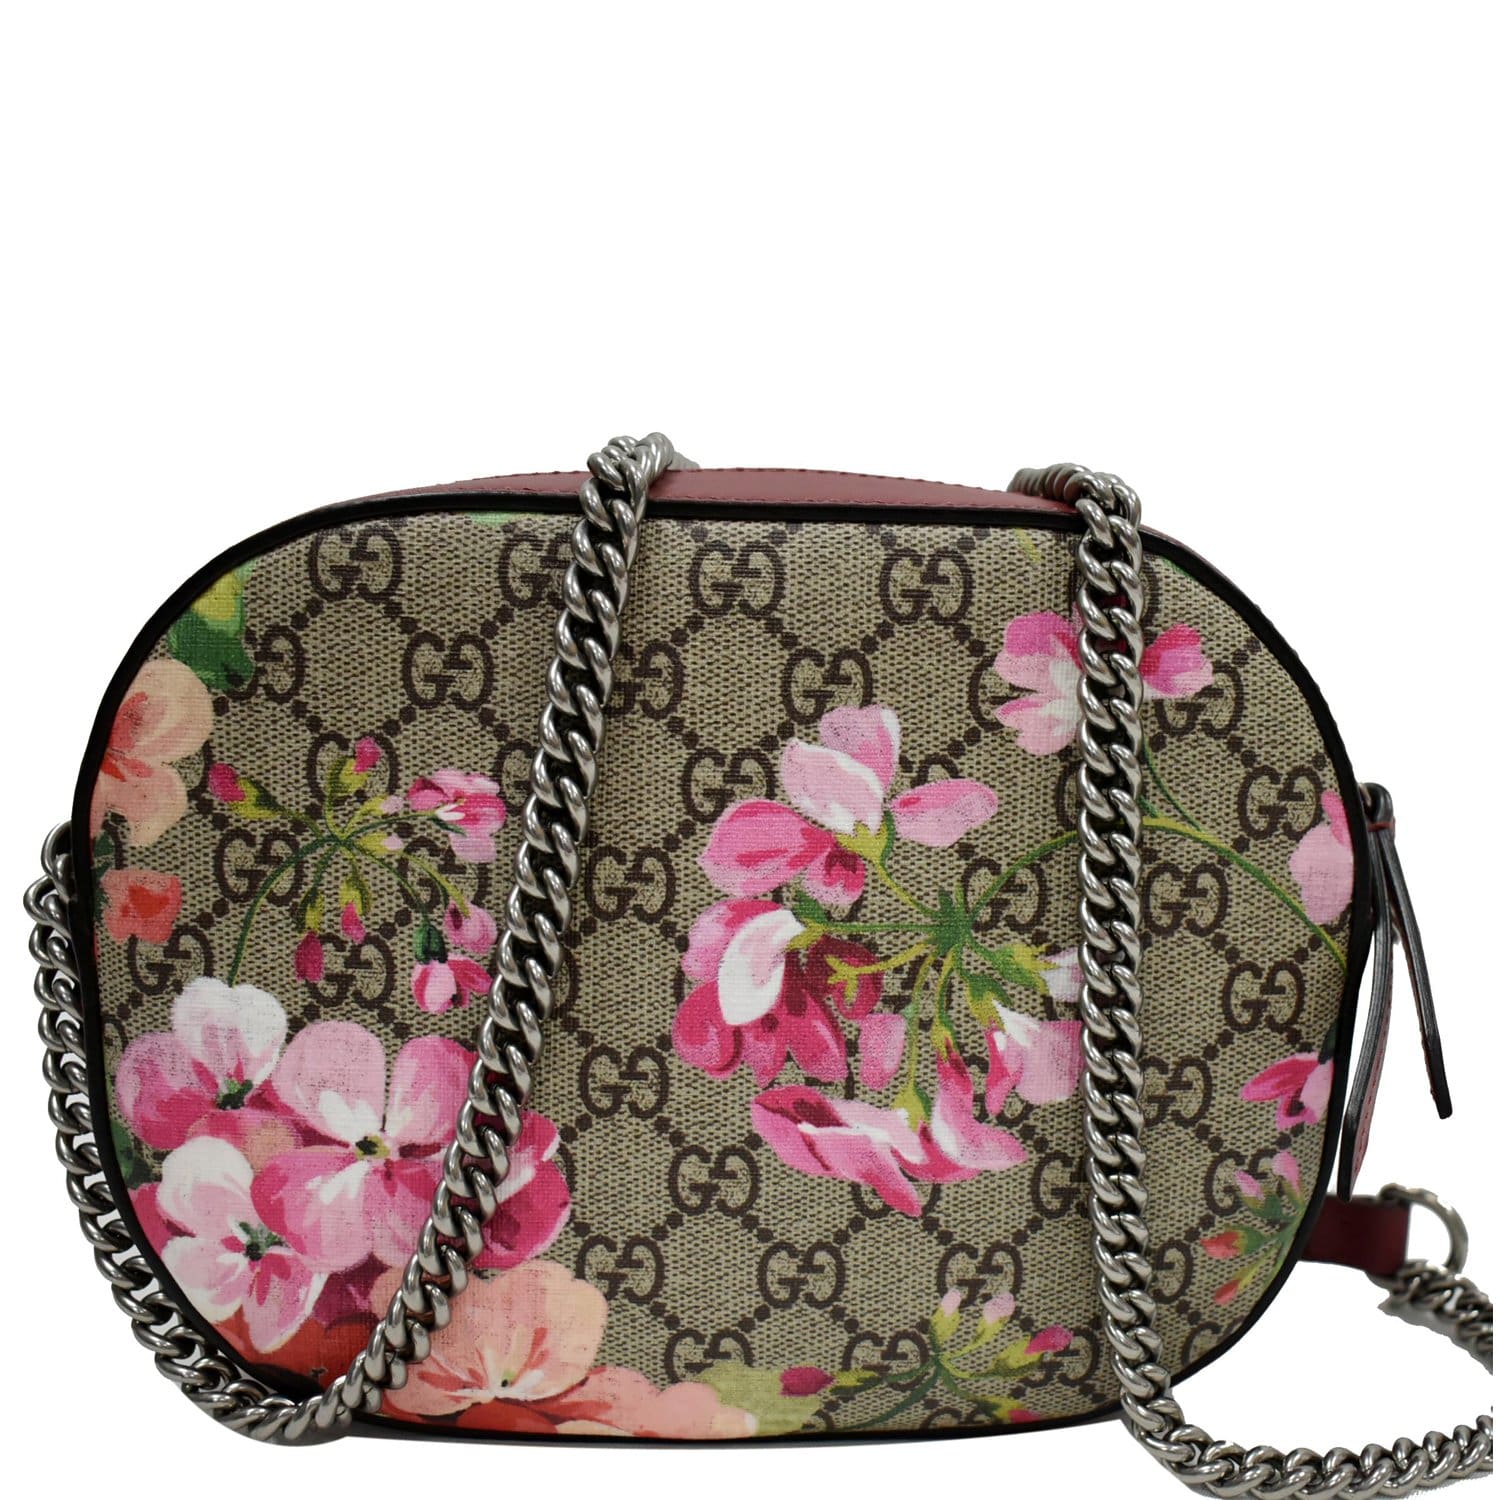 Gucci GG Supreme blooms pouch in pink. In excellent